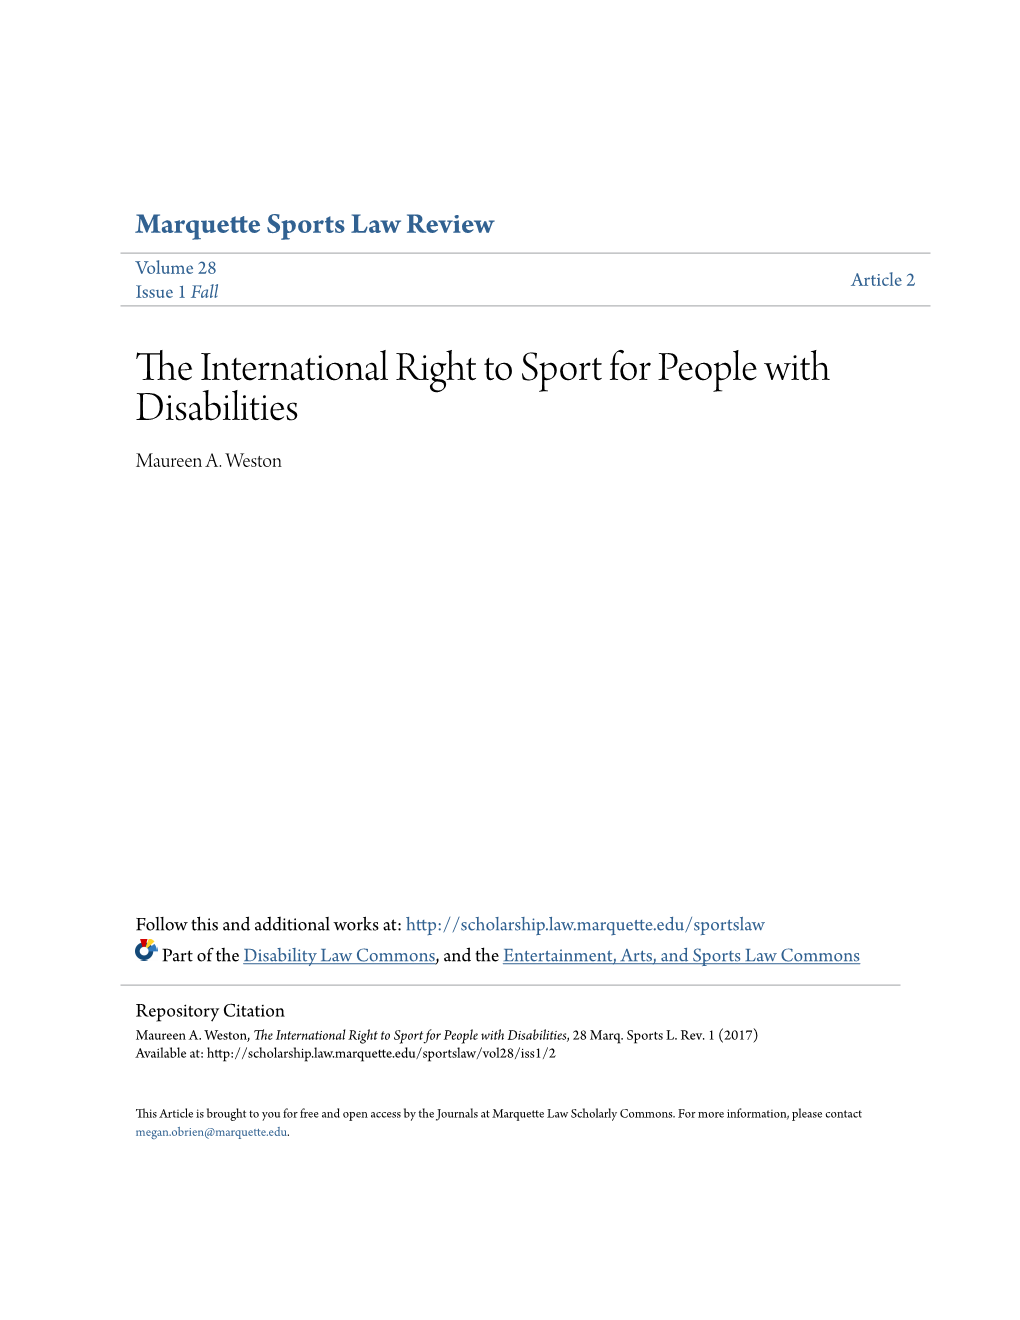 The International Right to Sport for People with Disabilities, 28 Marq